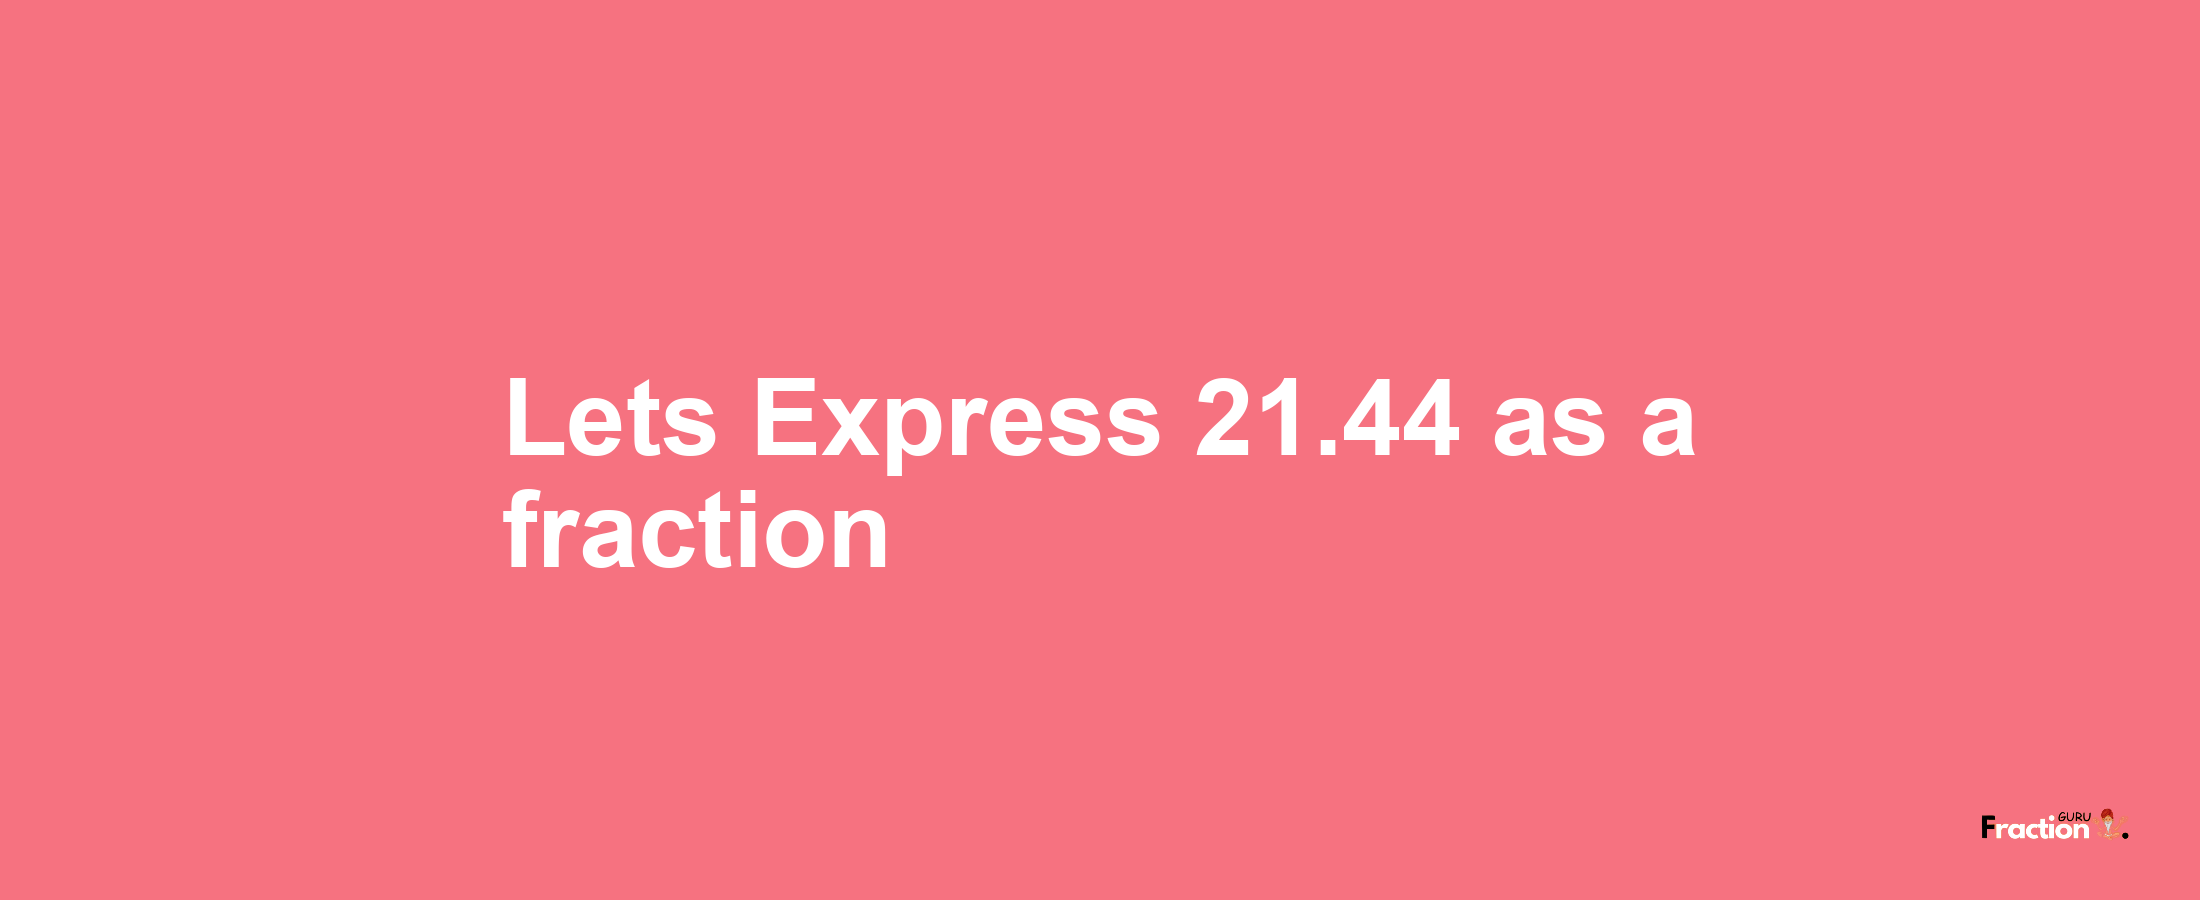 Lets Express 21.44 as afraction